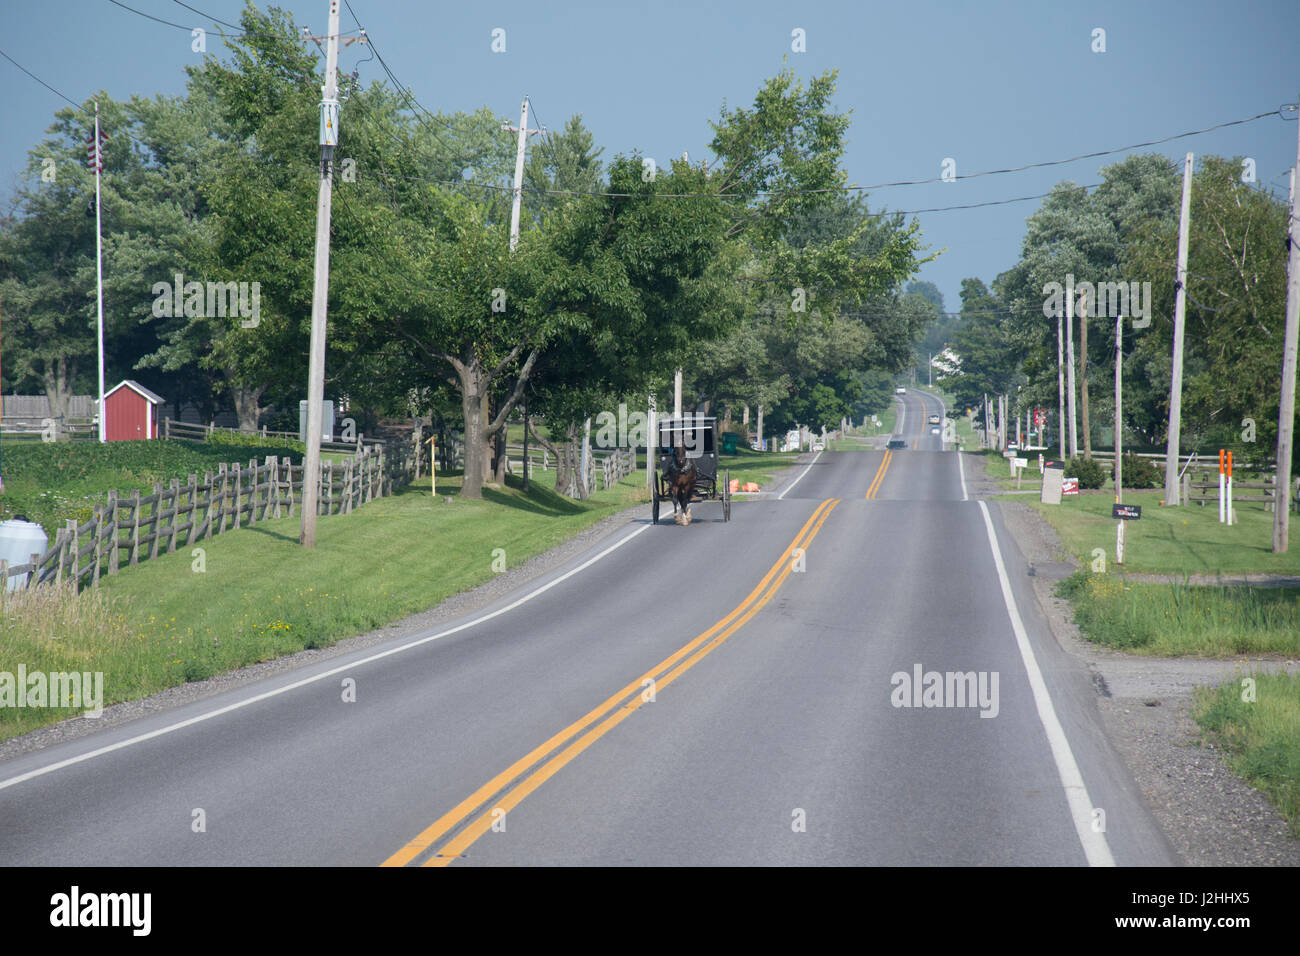 Ohio, Geauga County, Middlefield. Typical Amish horse carriage on the rural roads of Ohio. Stock Photo